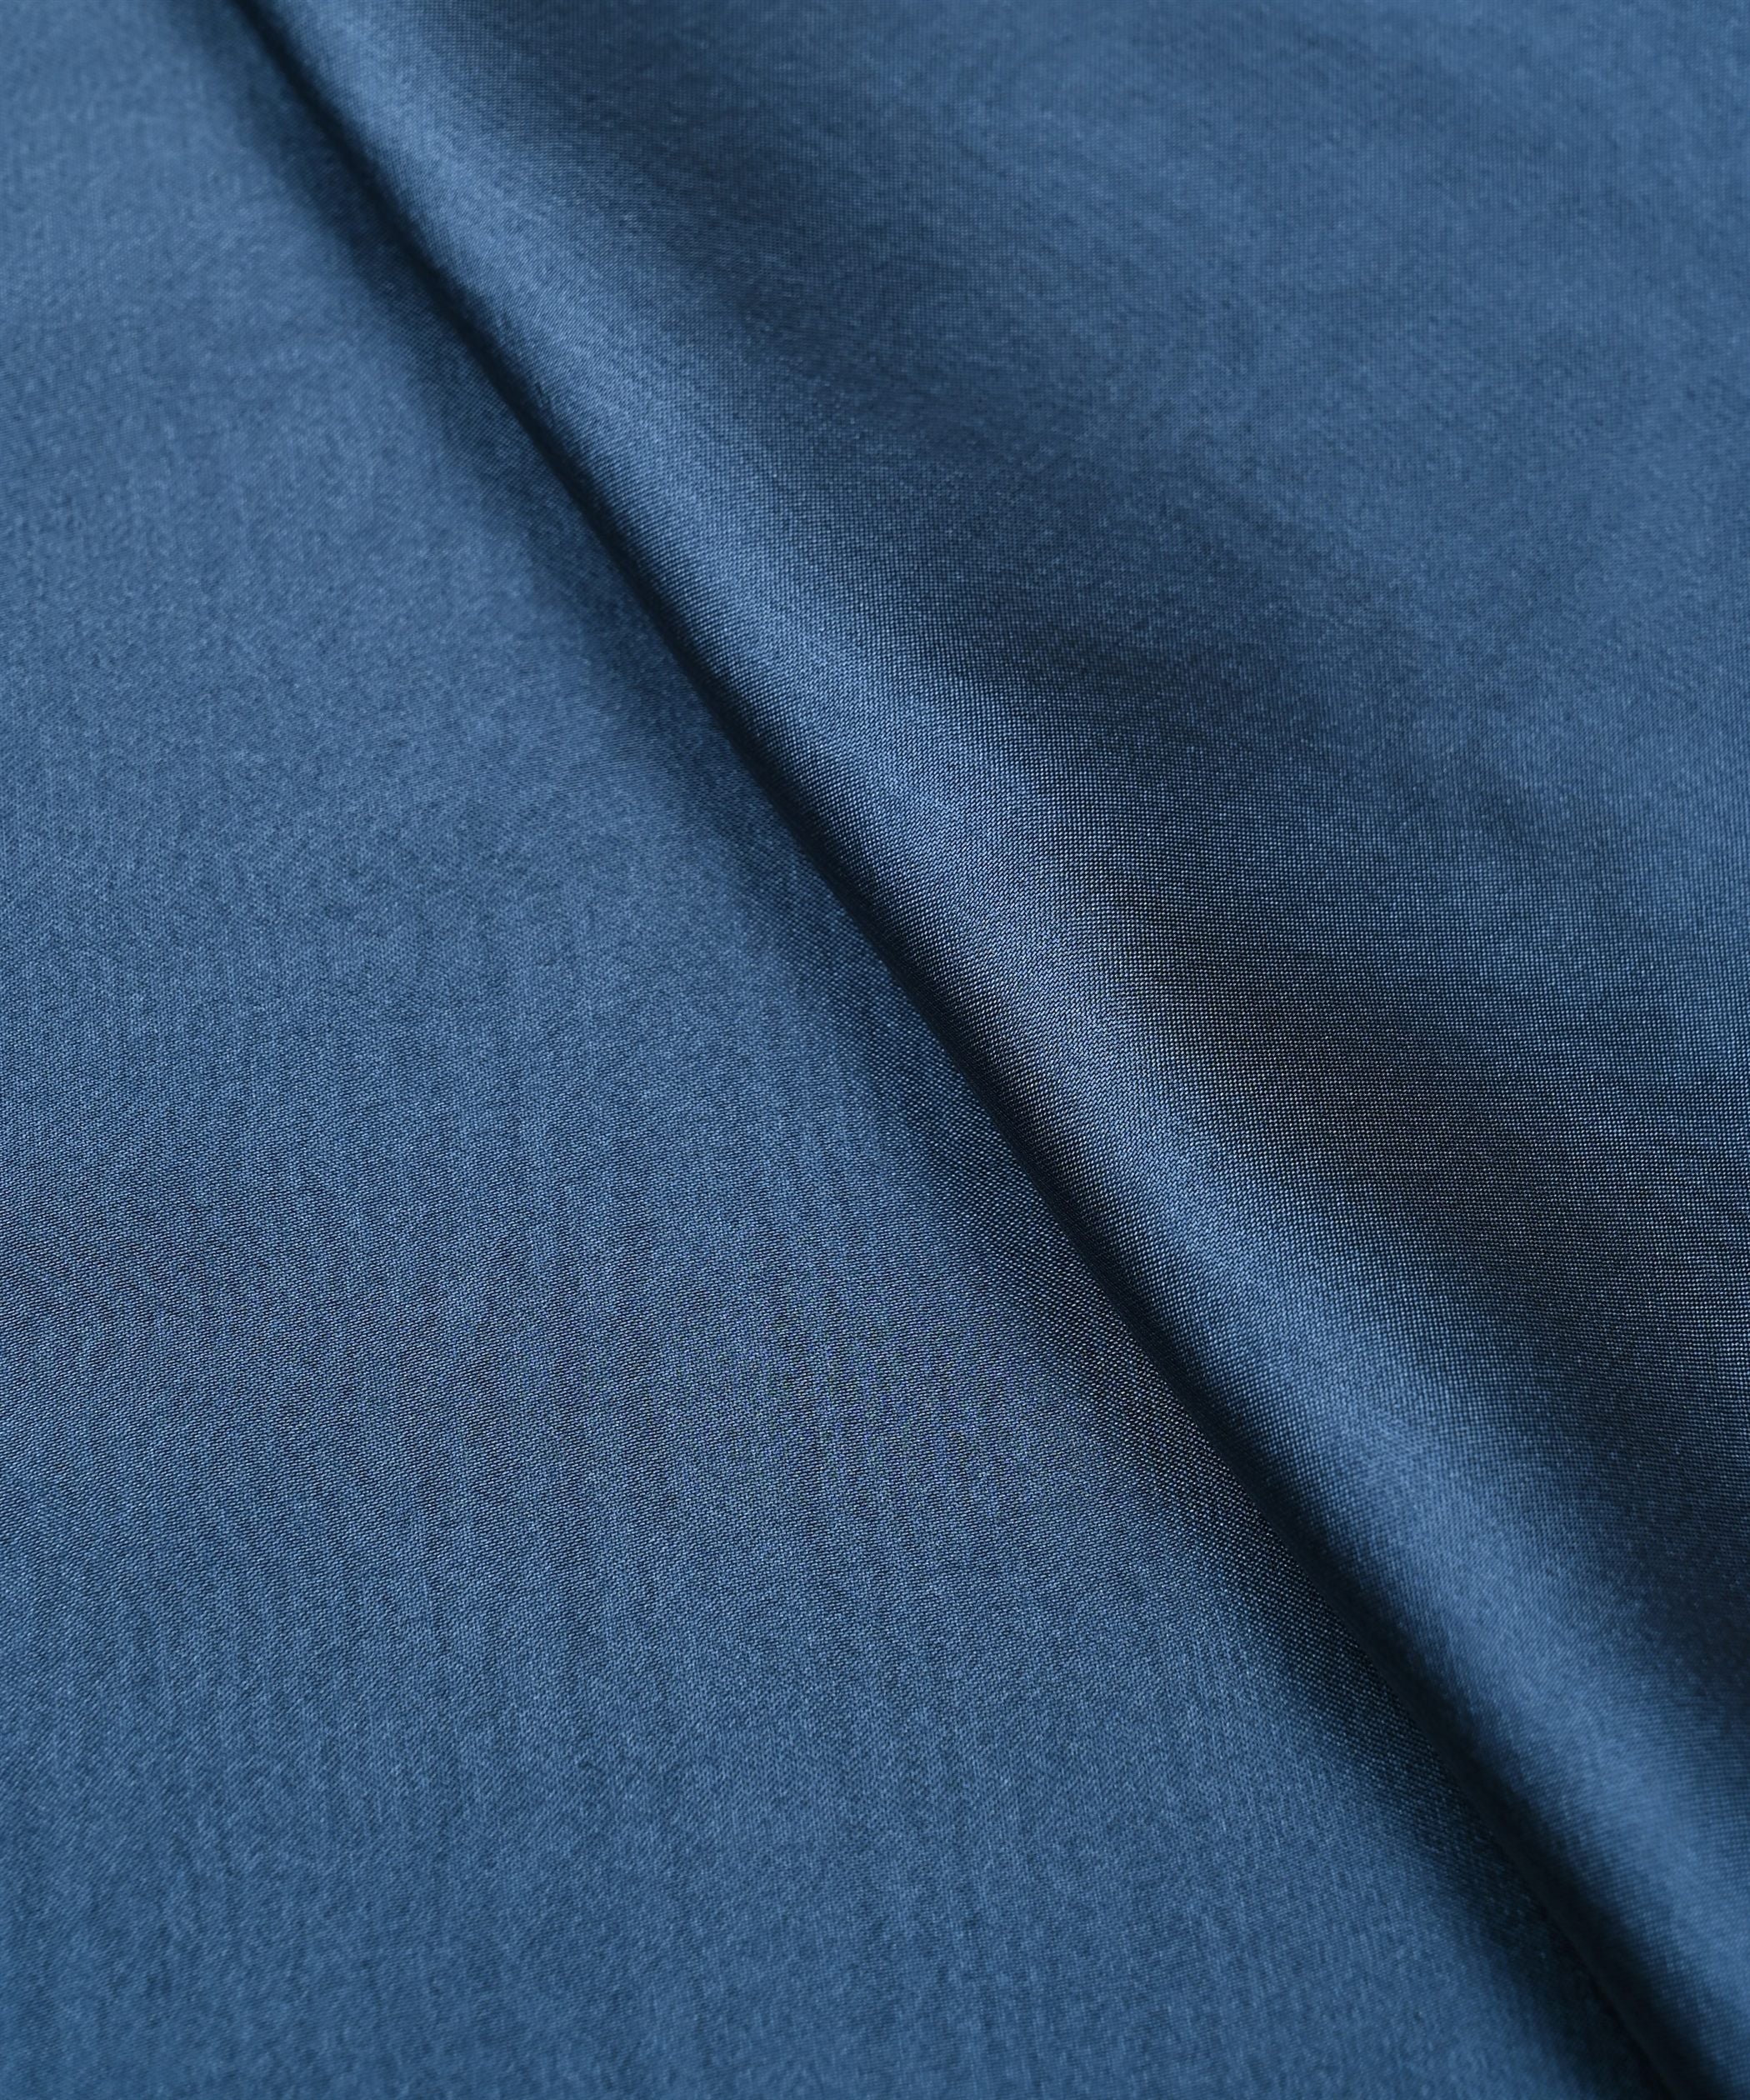 Navy Blue Plain Dyed Simmer Georgette Fabric